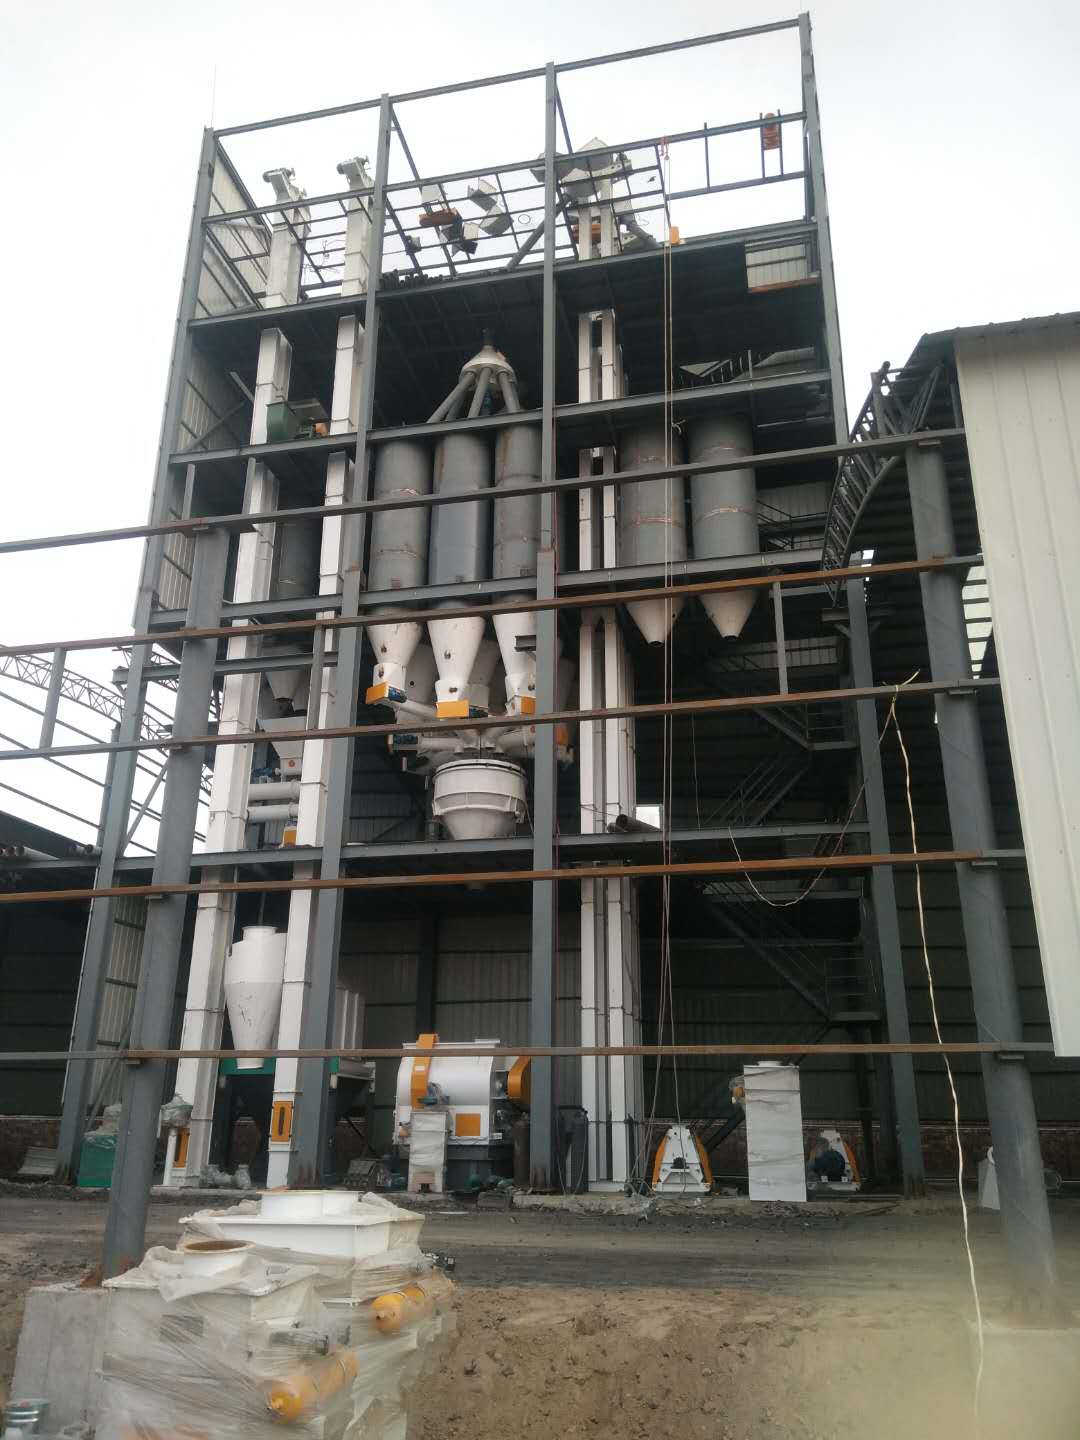 8-12 t/h feed production line installation site